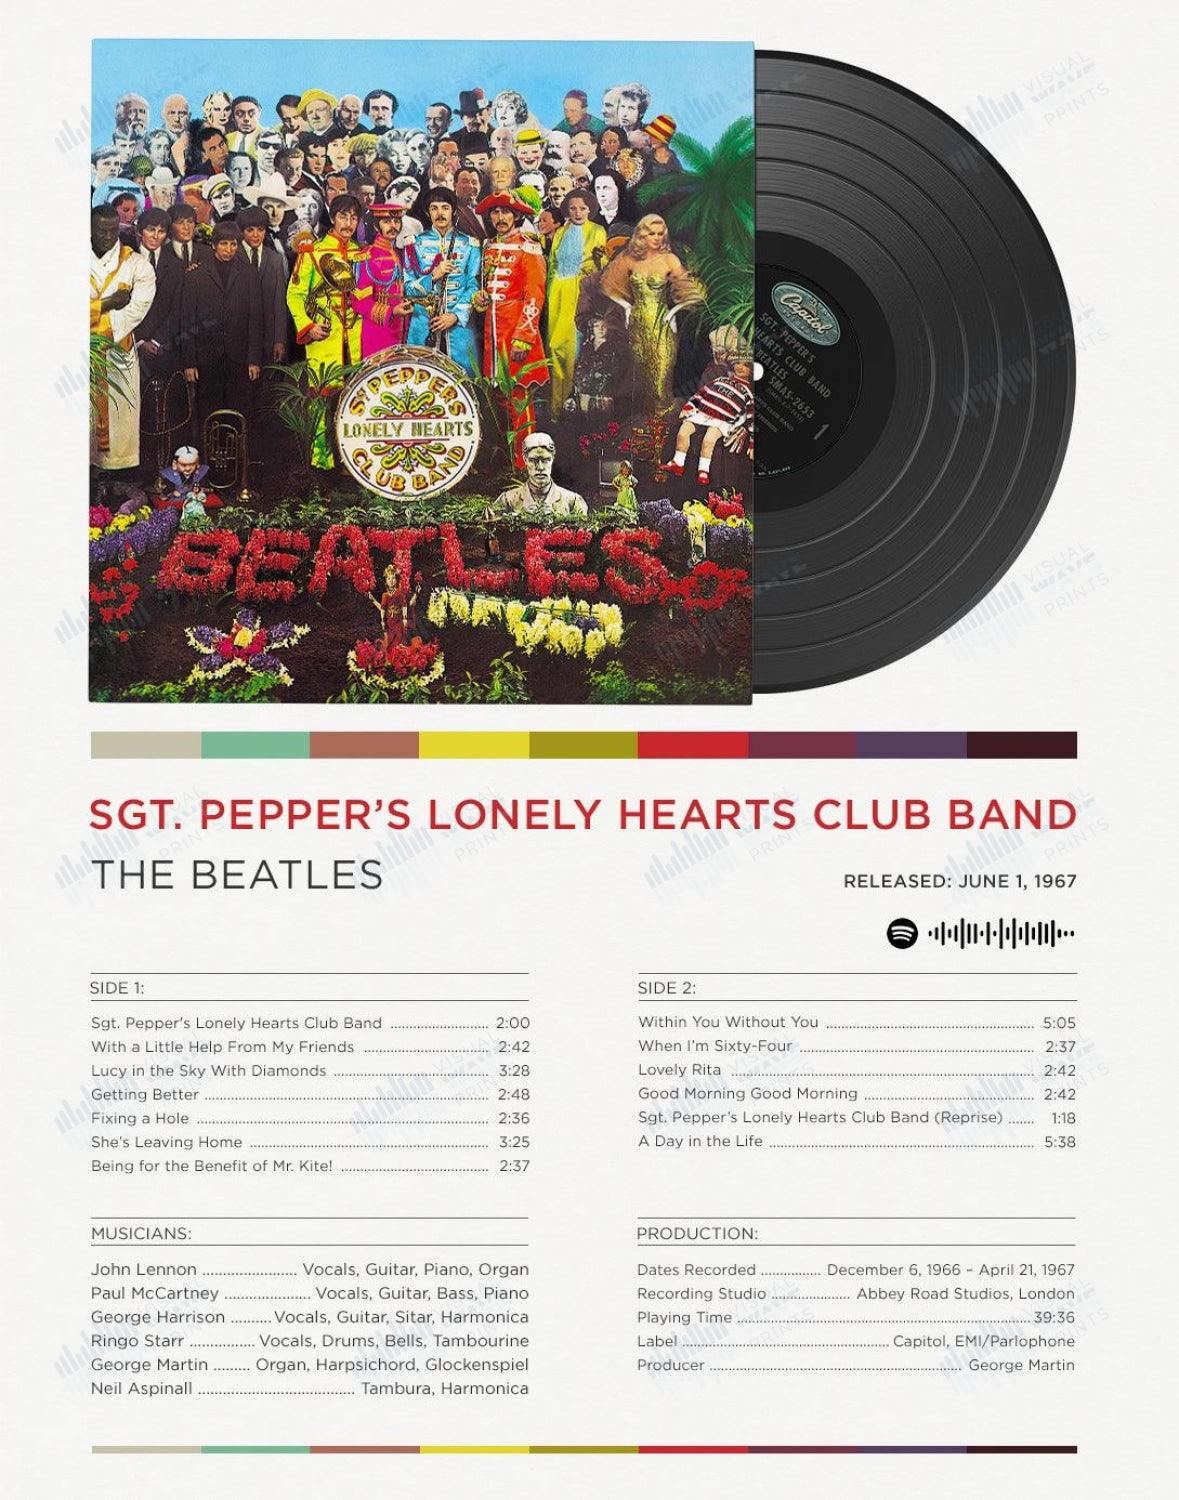 Album Art: Sgt. Pepper's Lonely Hearts Club Band by The Beatles